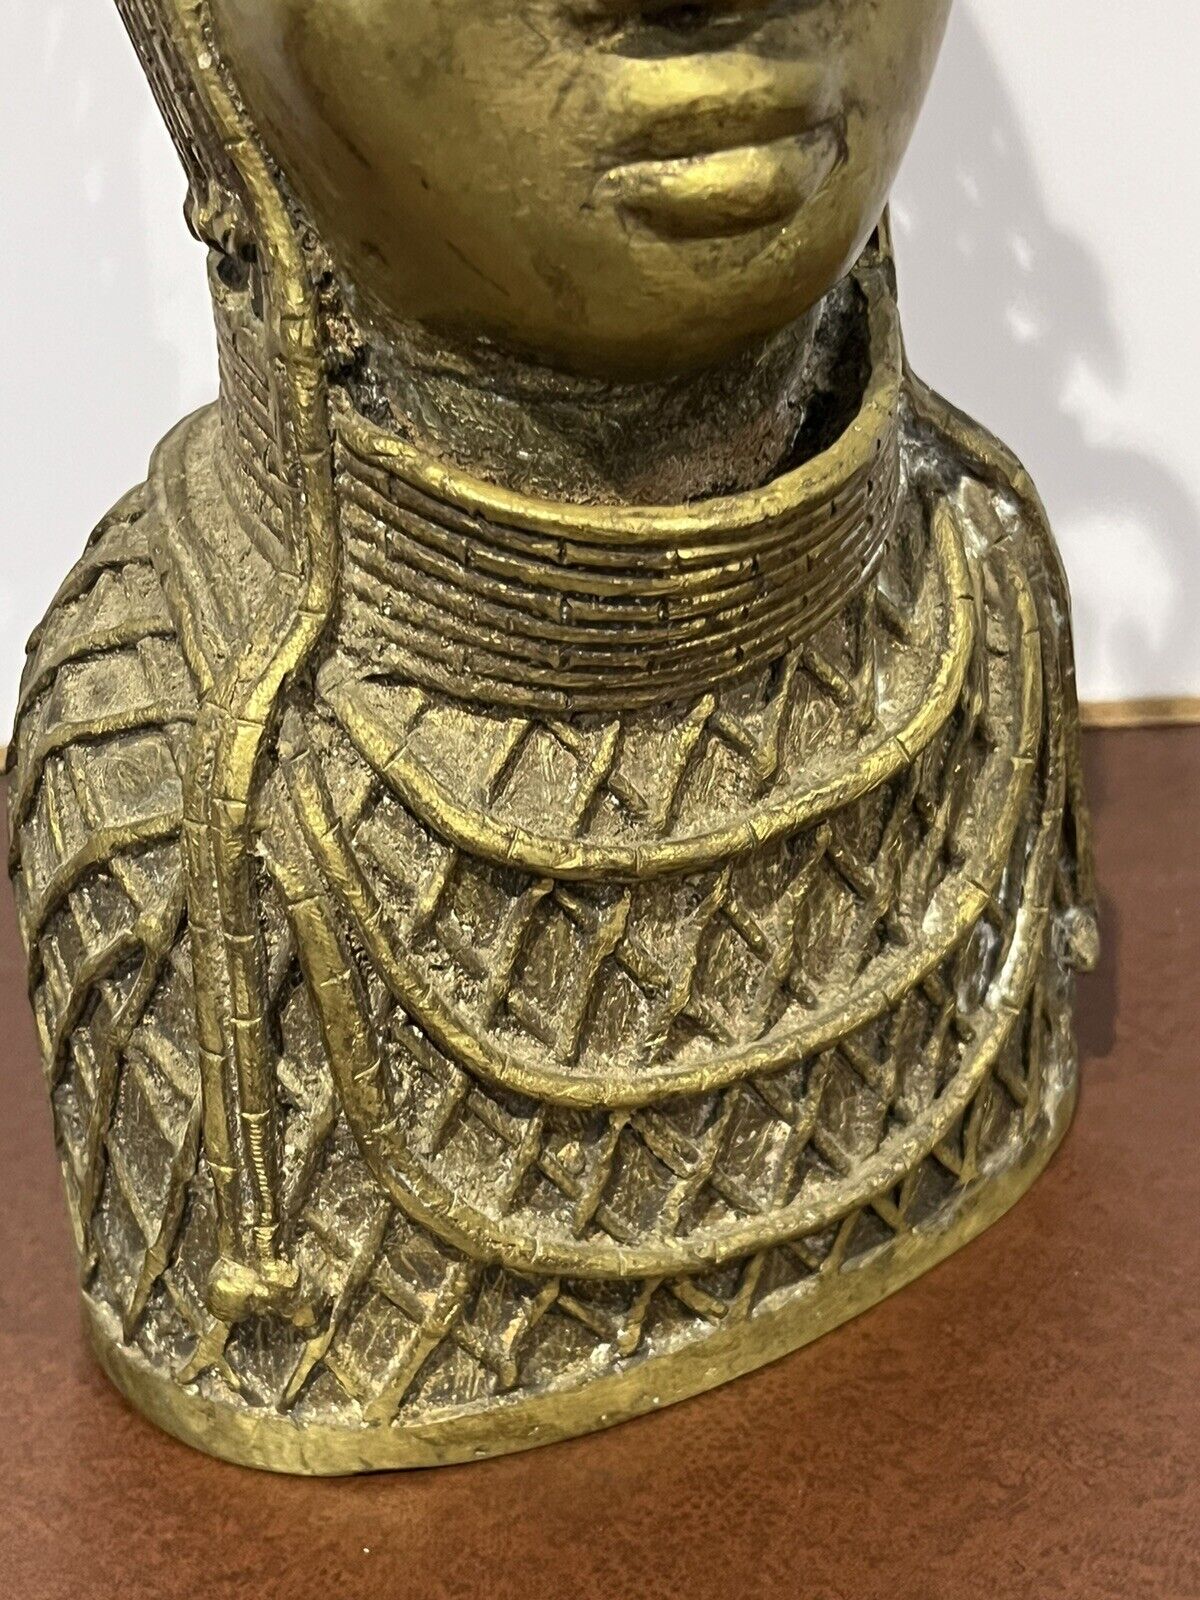 Benin Bronze Bust Of A King. LARGE IN SIZE. We Ship Worldwide.